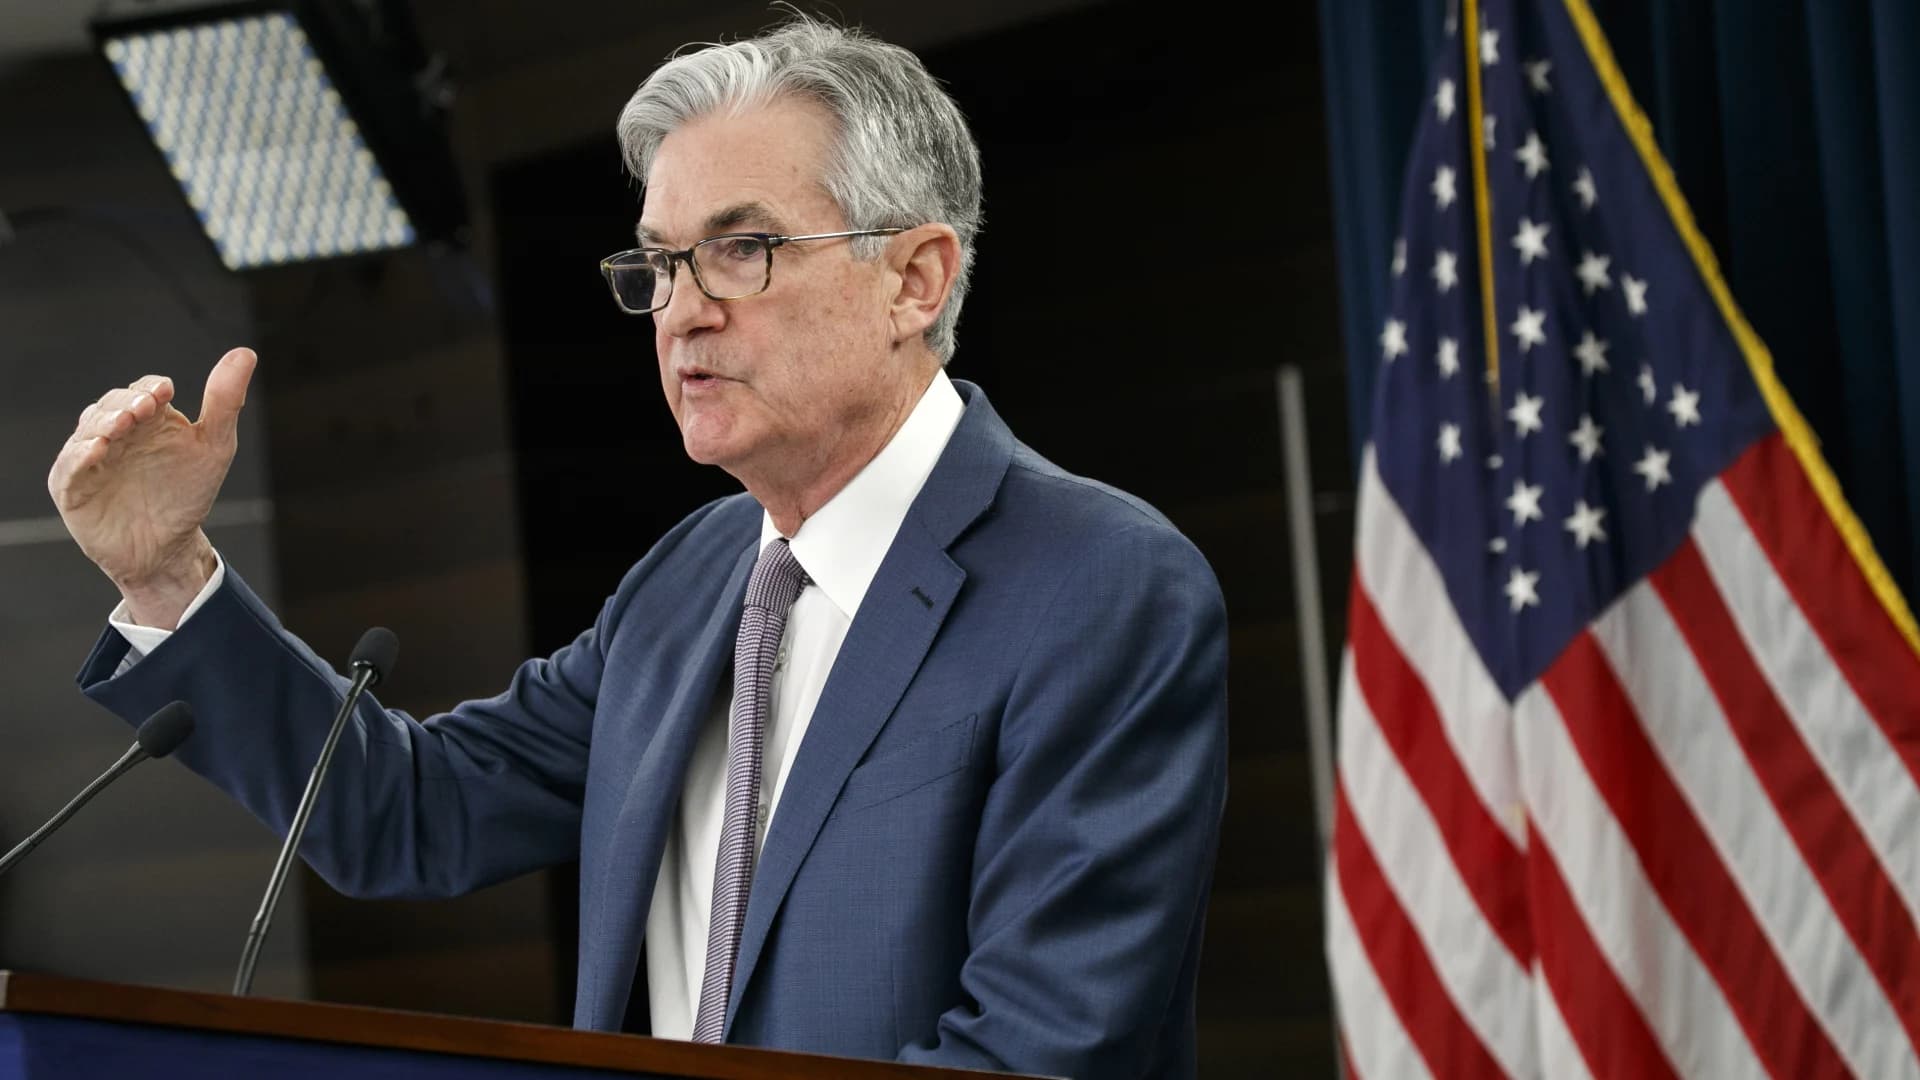 Fed plans to raise rates as soon as March to cool inflation